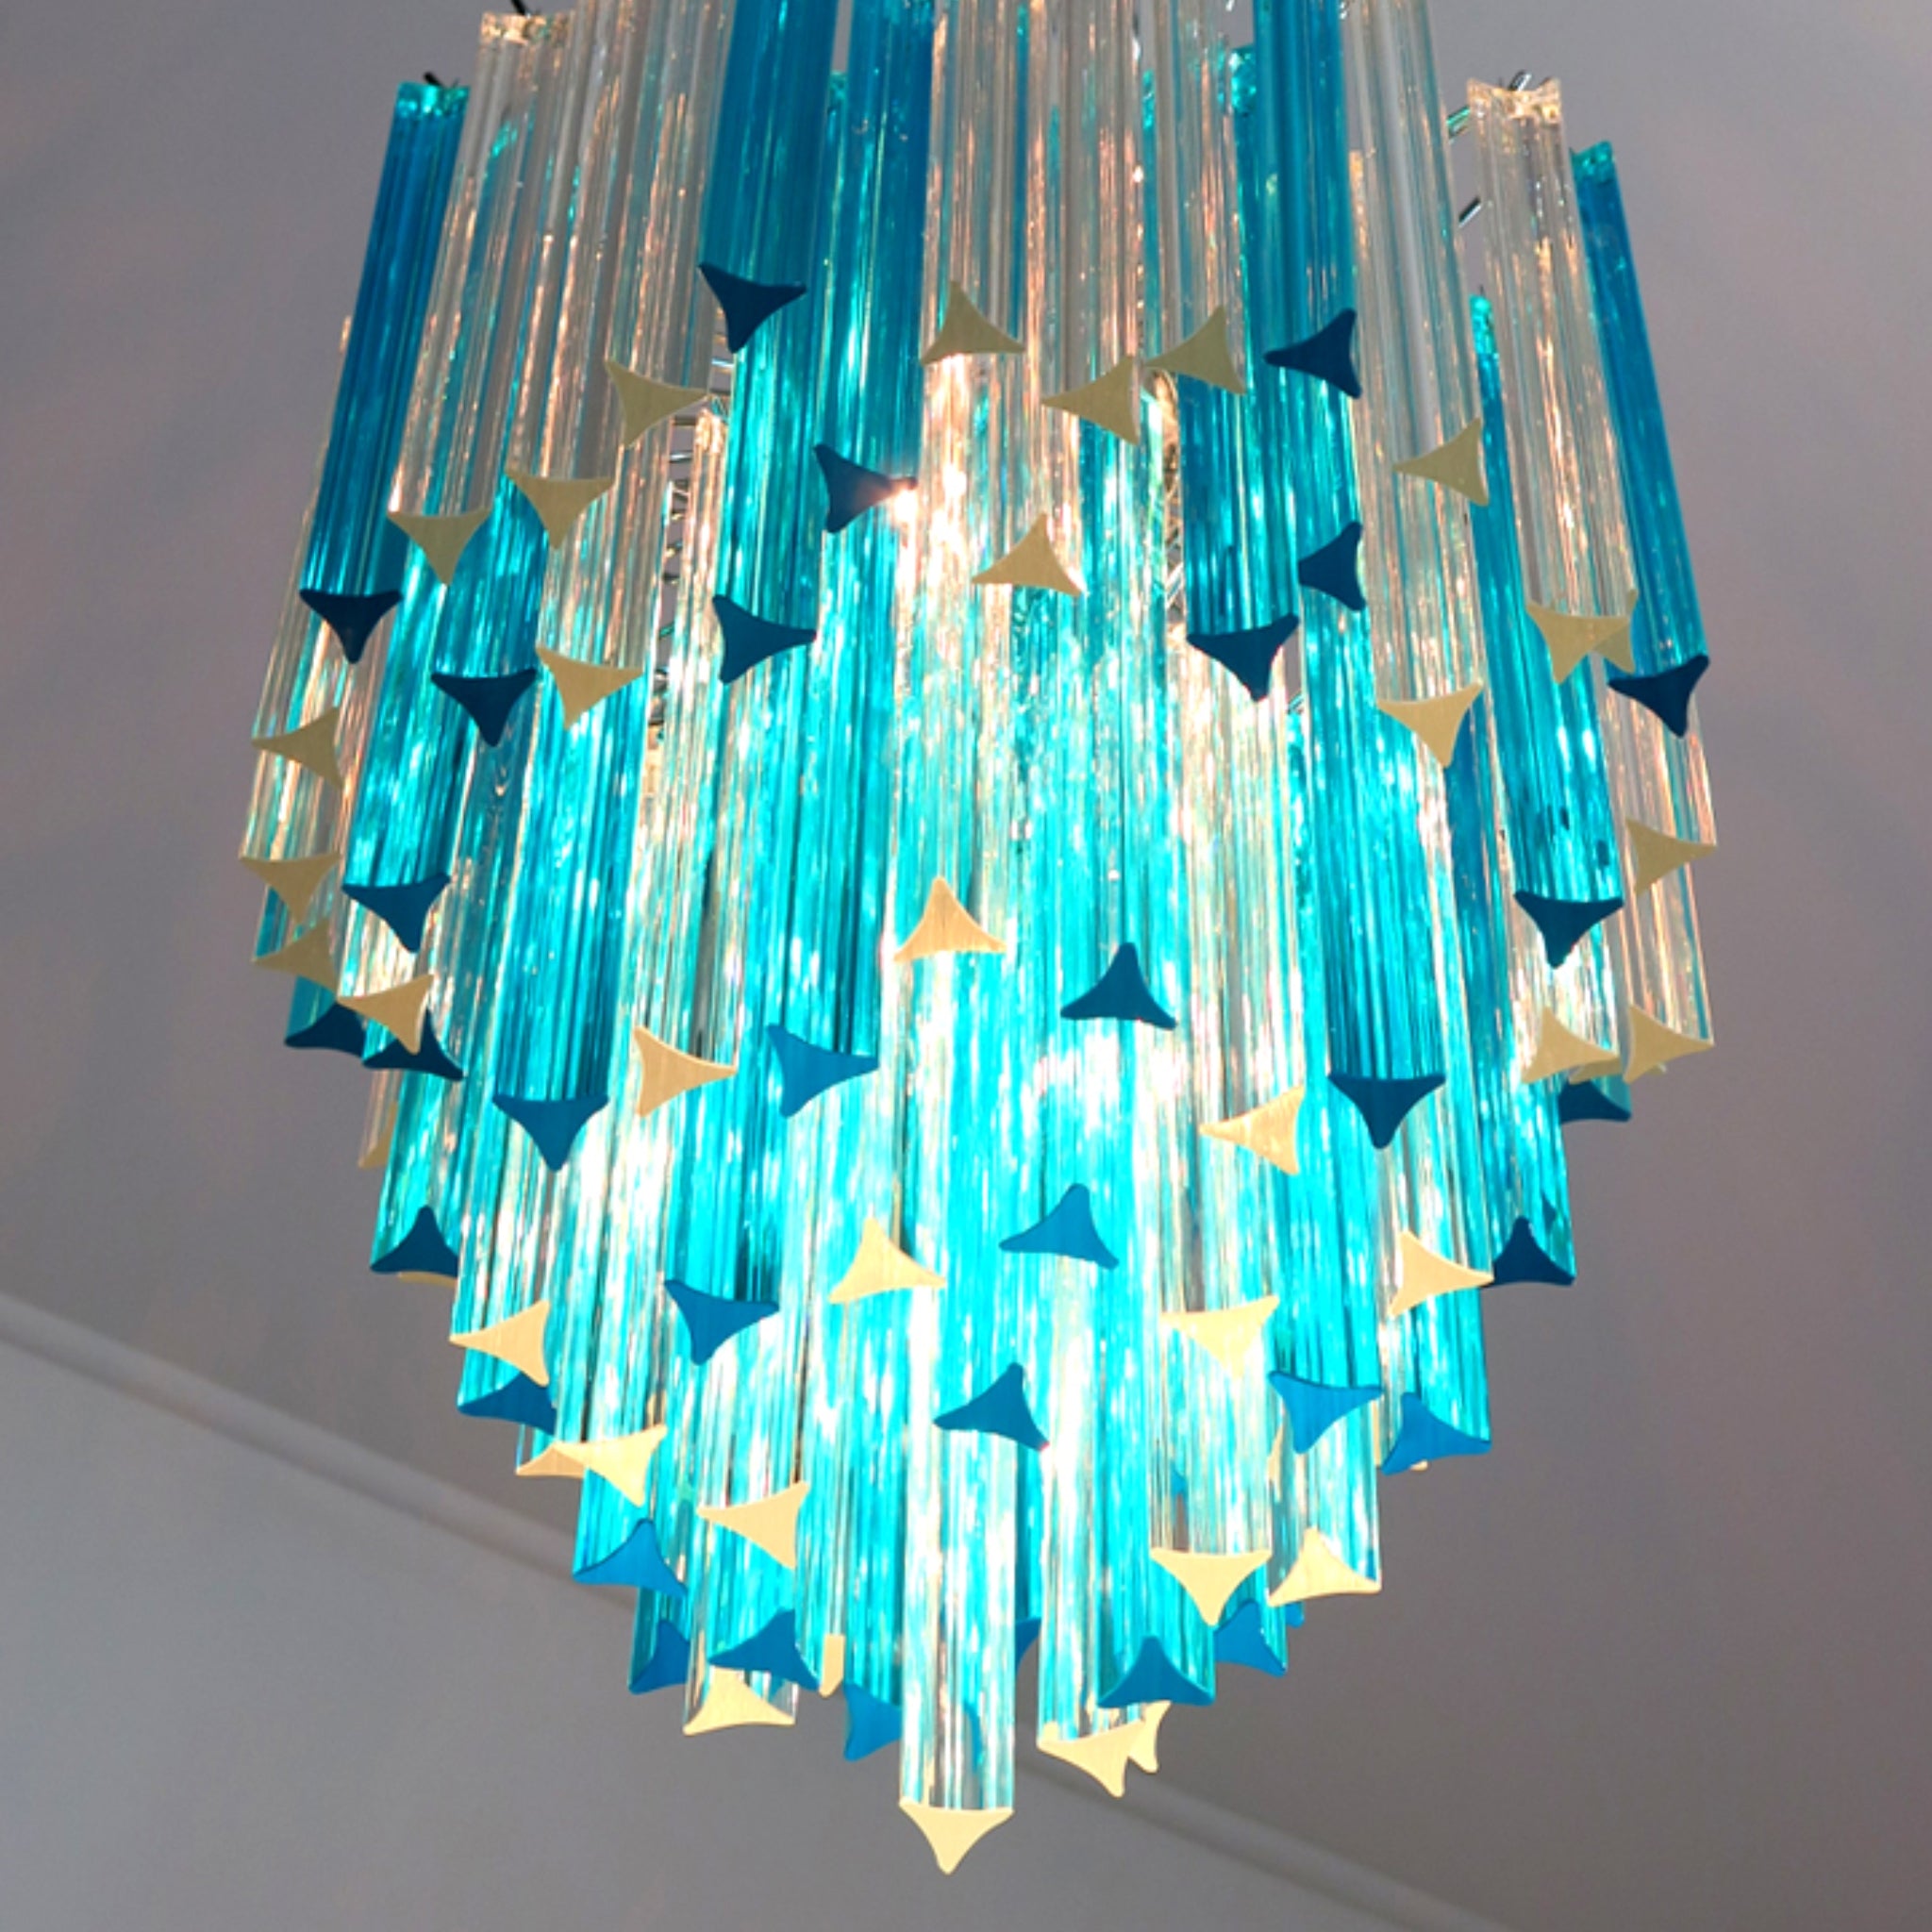 Murano chandelier triedri with 92 prism - trasparent and blue